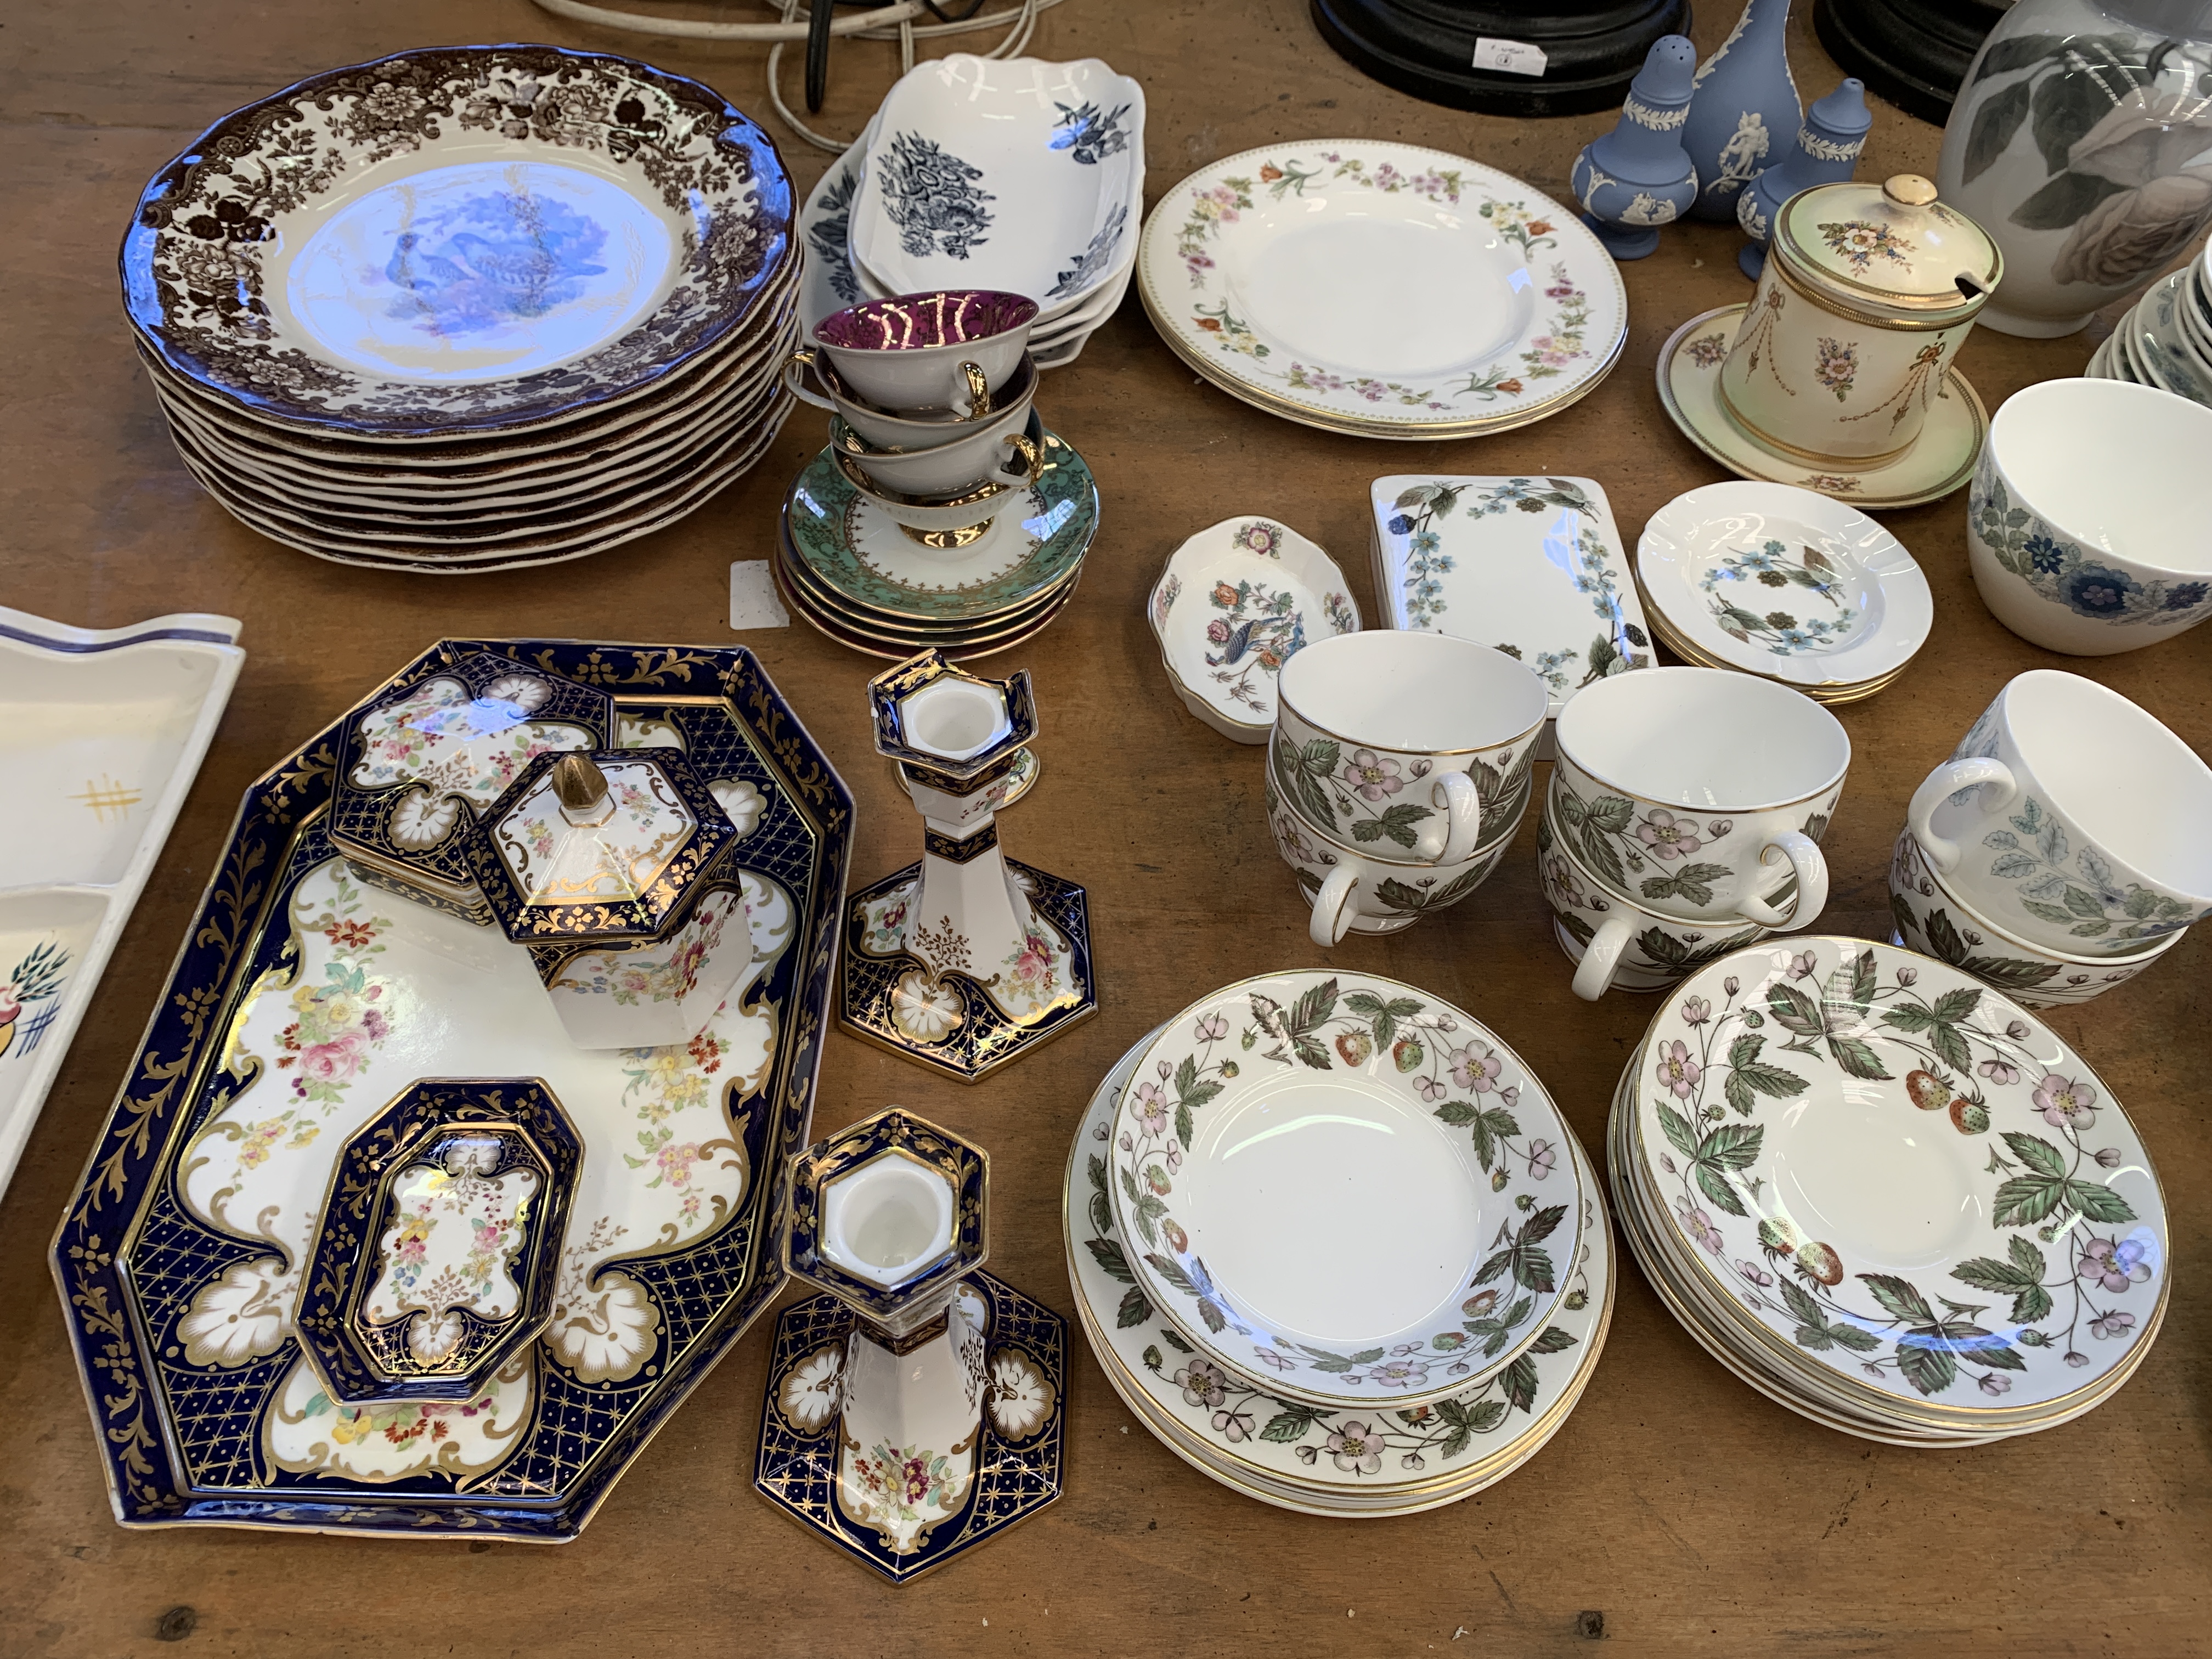 Quantity of tea sets and other china